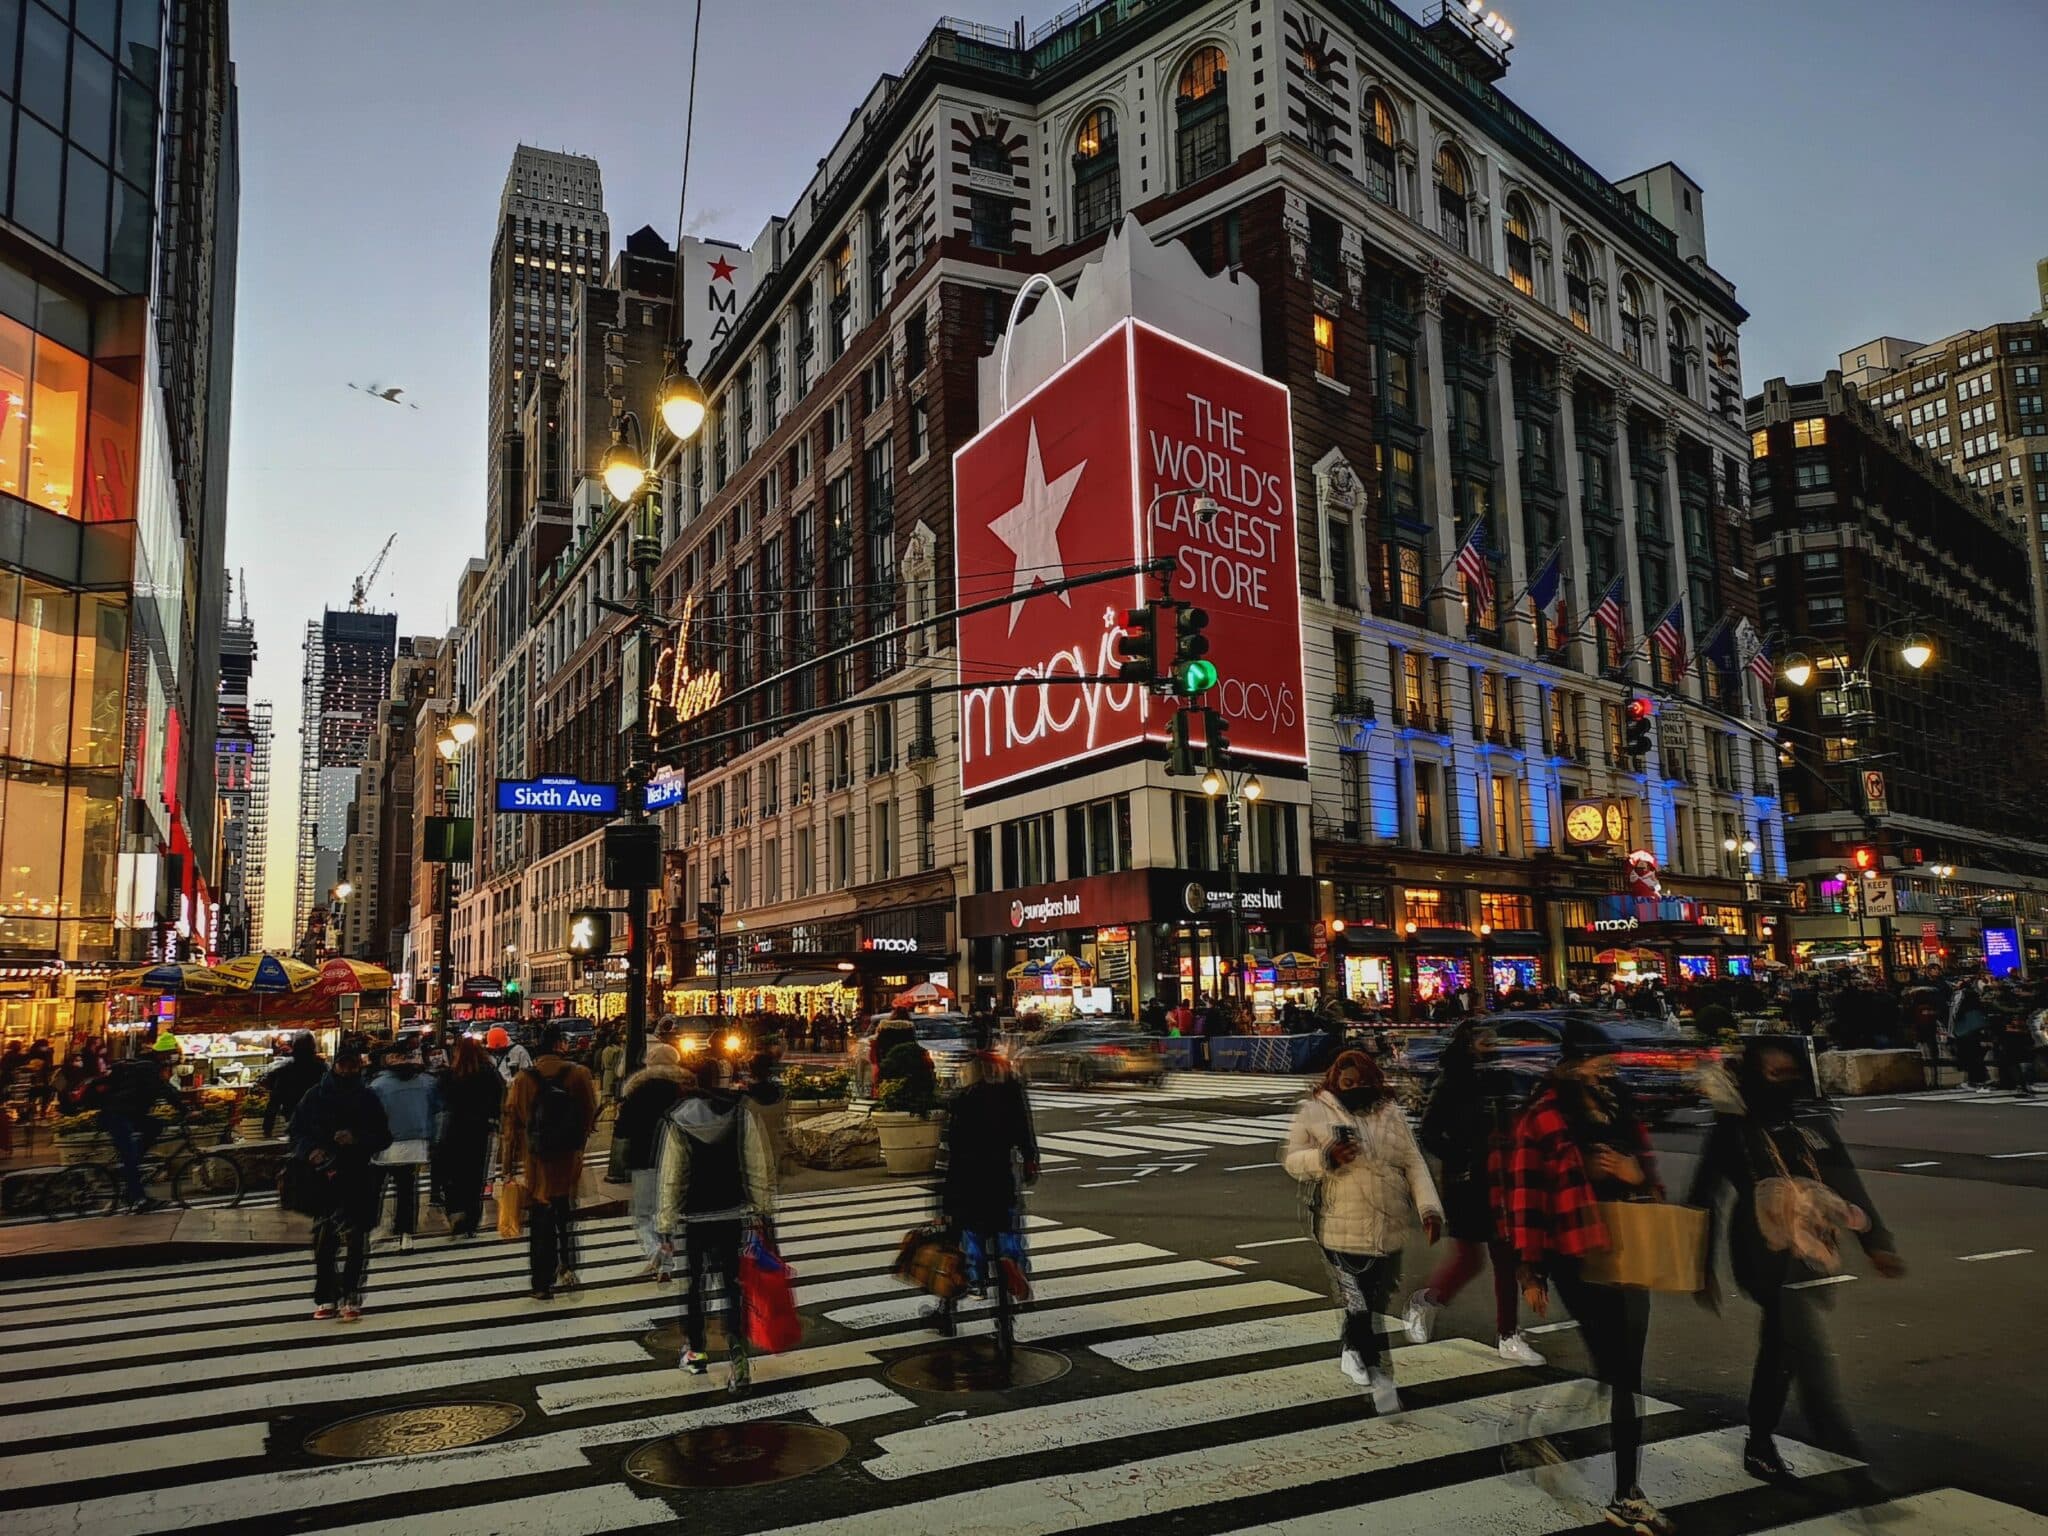 An image of a Macy's store.